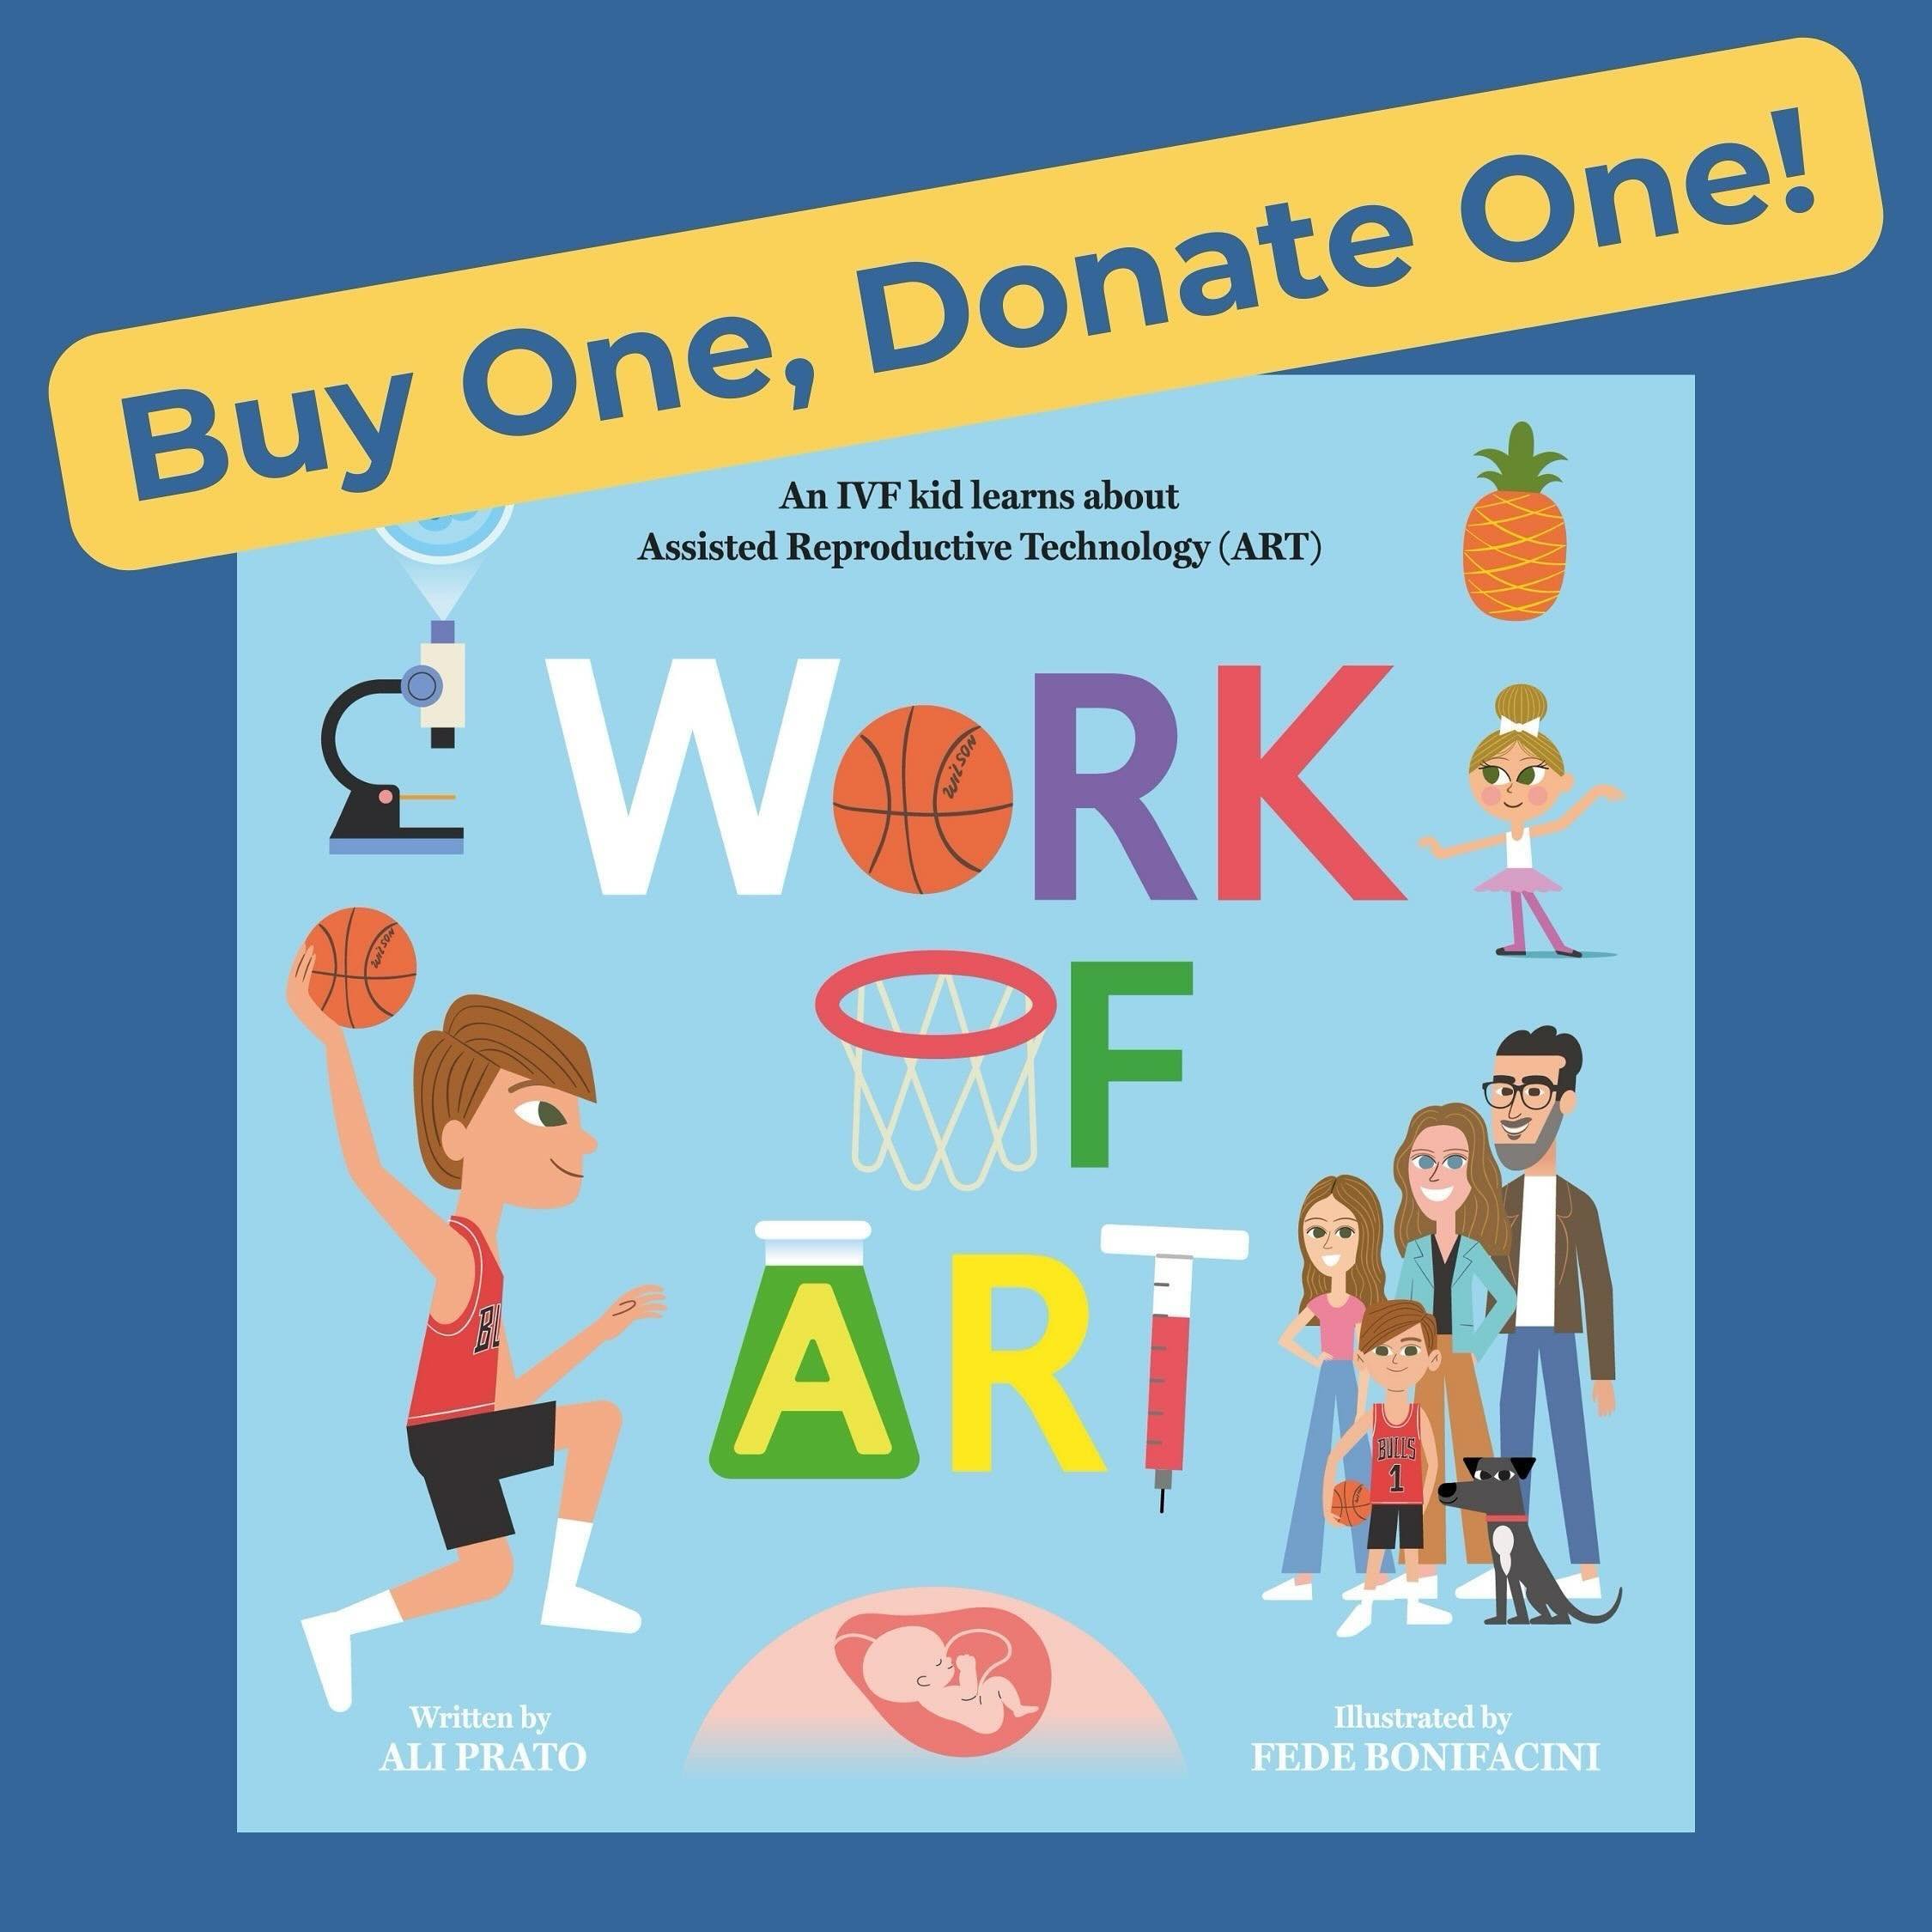 🧡🧡🧡🧡NIAW🧡🧡🧡🧡

It&rsquo;s National Infertility Awareness Week, and I am kicking off a &ldquo;Buy One, Donate One,&rdquo; campaign for my children&rsquo;s book about IVF, &ldquo;Work of ART.&rdquo; 

From today through Saturday 4/27, if you pur